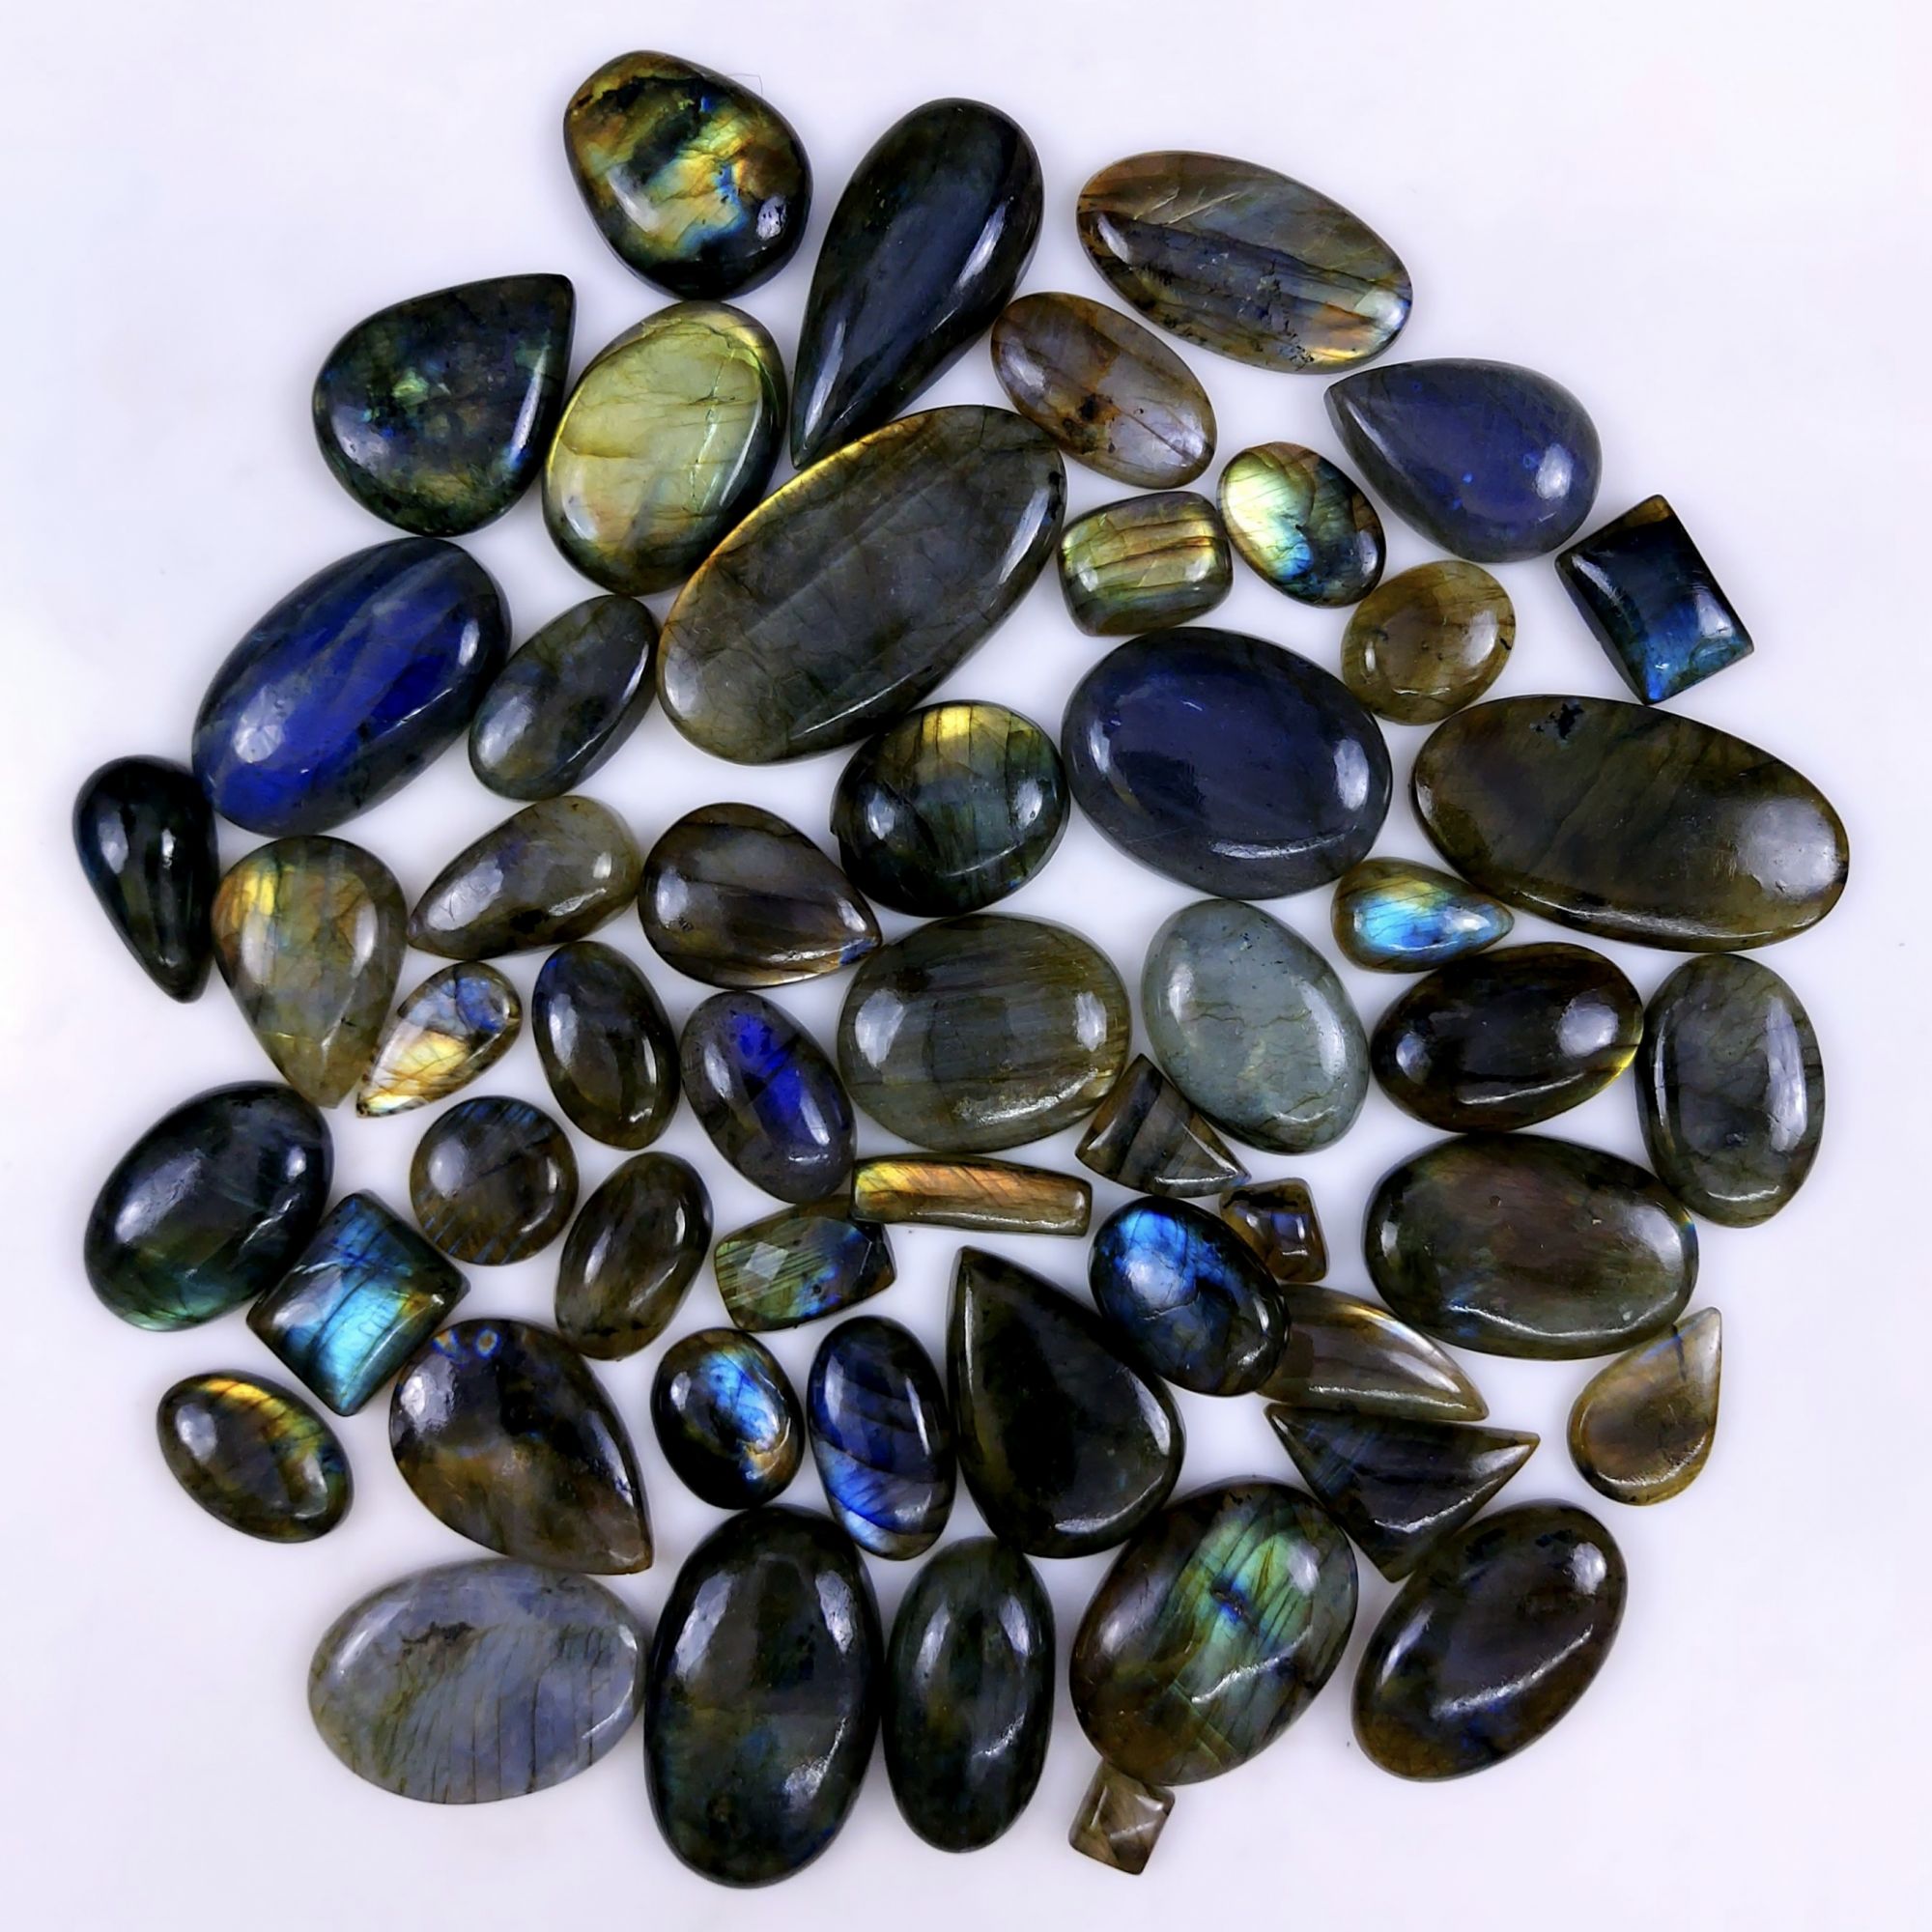 42pc 1684Cts Labradorite Cabochon Multifire Healing Crystal For Jewelry Supplies, Labradorite Necklace Handmade Wire Wrapped Gemstone Pendant 50x28 18x12mm#6338